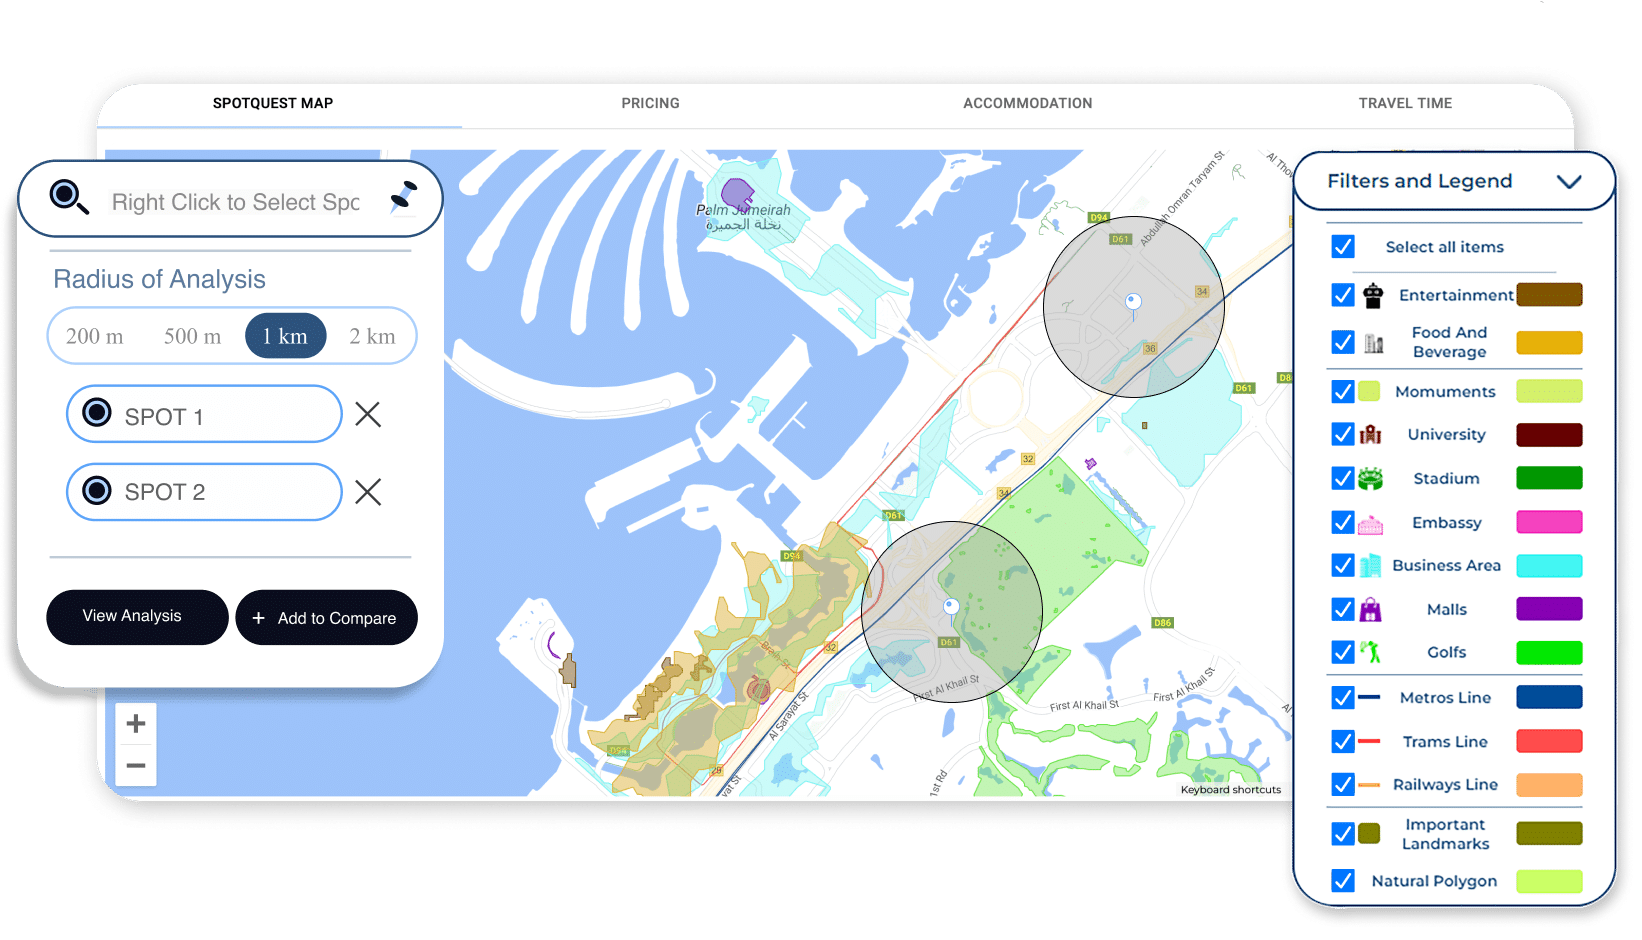 SPOTQUEST LAUNCHES THE MOST ADVANCED LOCATION INTELLIGENCE PLATFORM, SET TO DISRUPT THE TRAVEL INDUSTRY